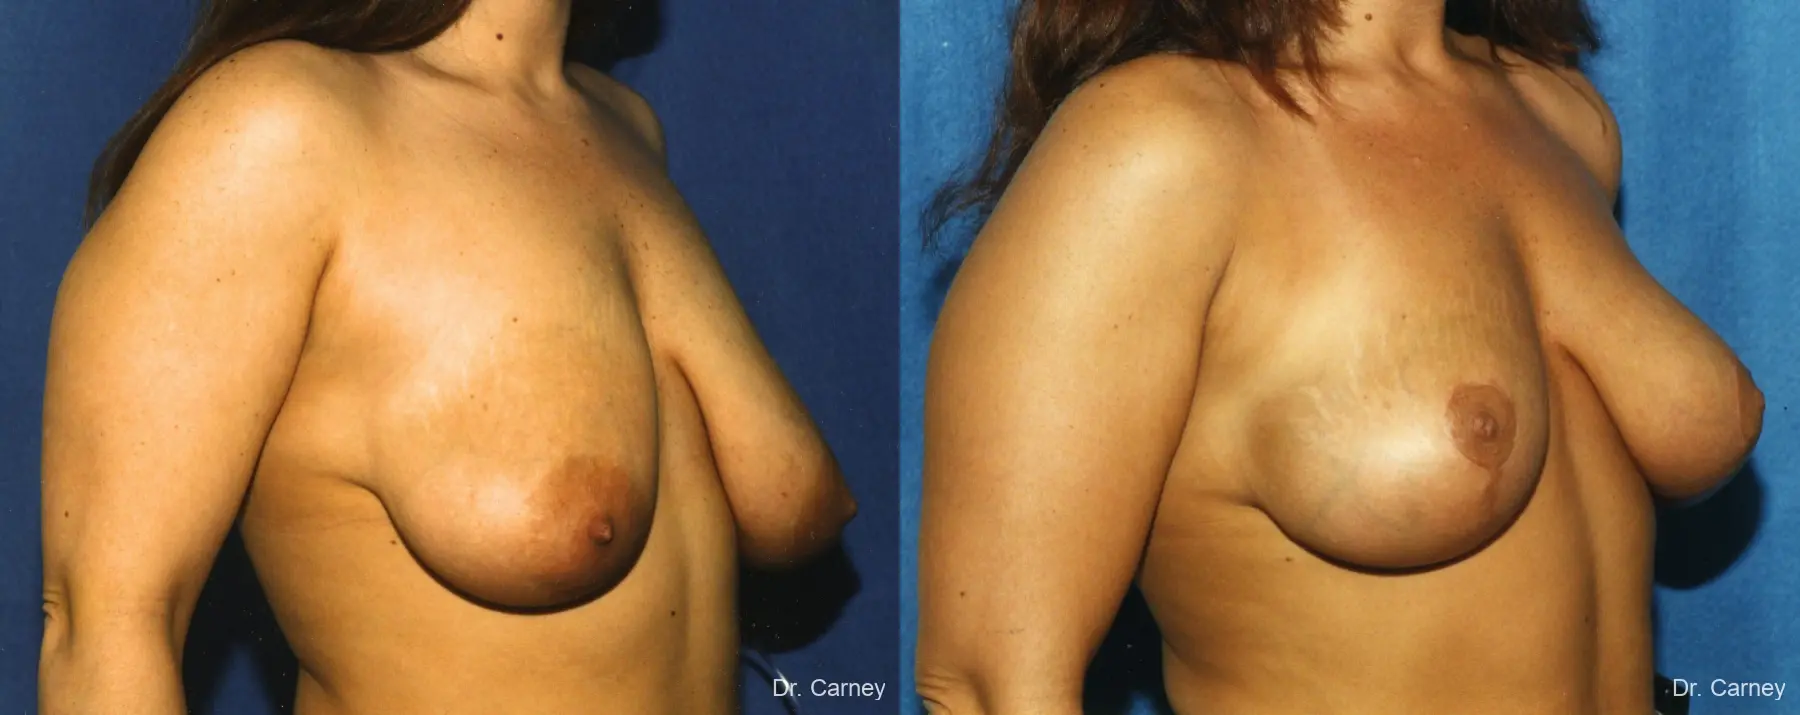 Virginia Beach Breast Lift 1187 - Before and After 1